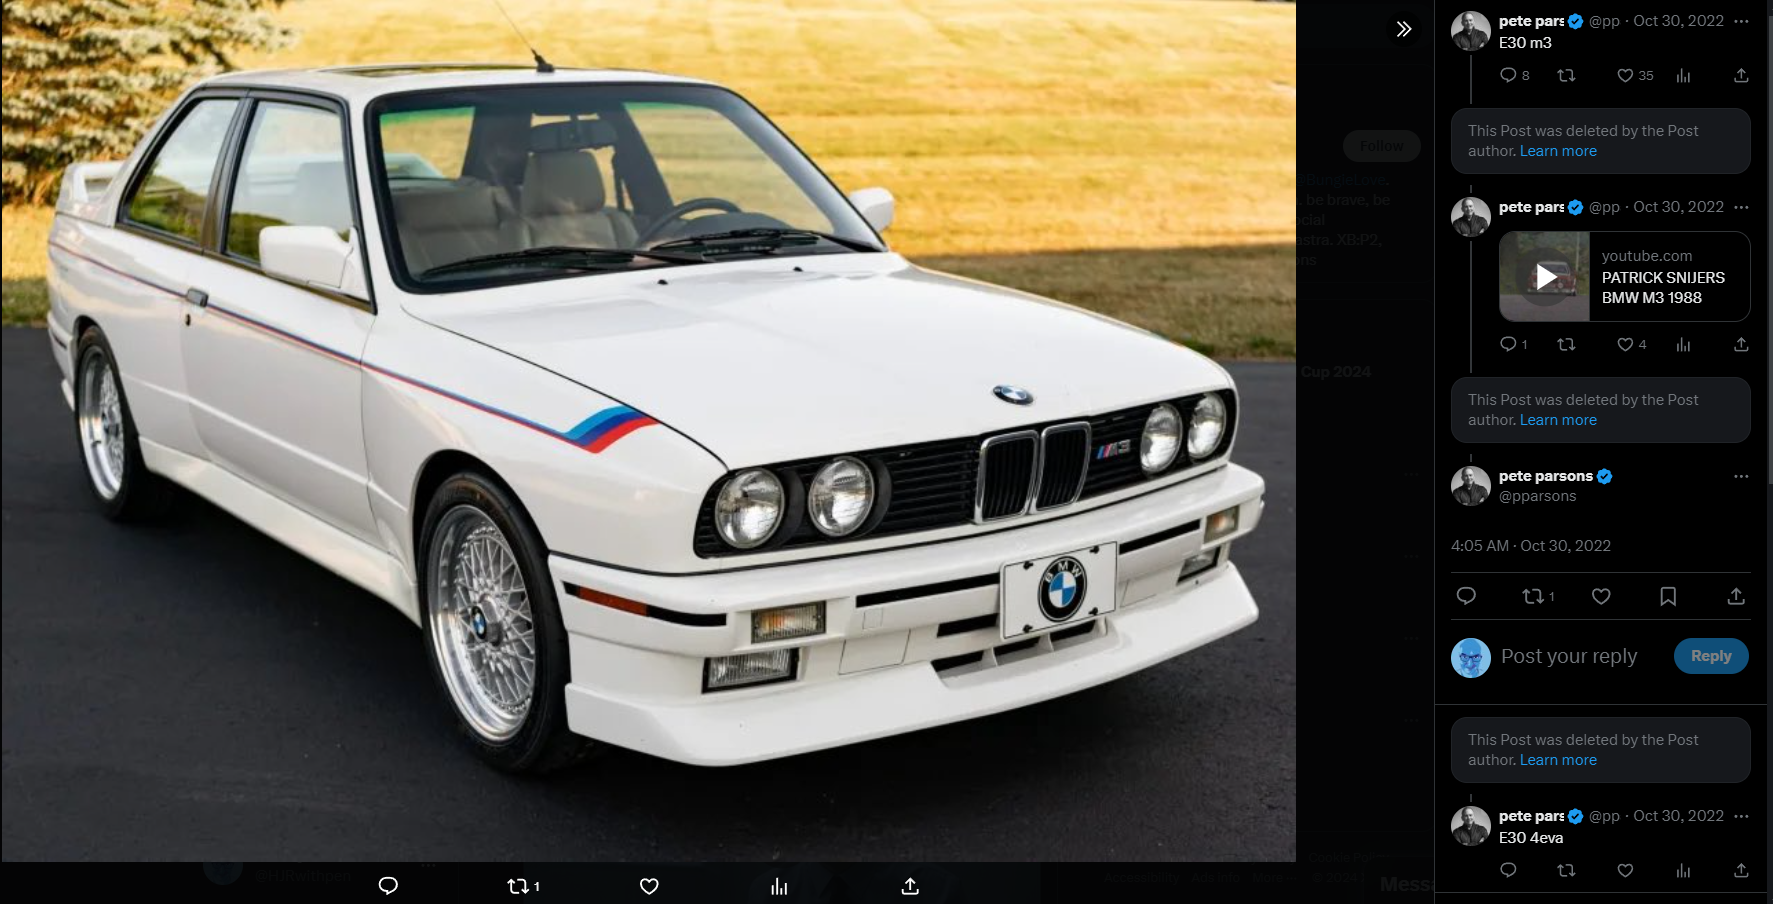 A photo of a 38k-Mile 1990 BMW M3 sold on $180,000 on October 6, 2022 on bringatrailer.com, next to a collection of tweets - some deleted - from the CEO of Bungie Pete Parsons.